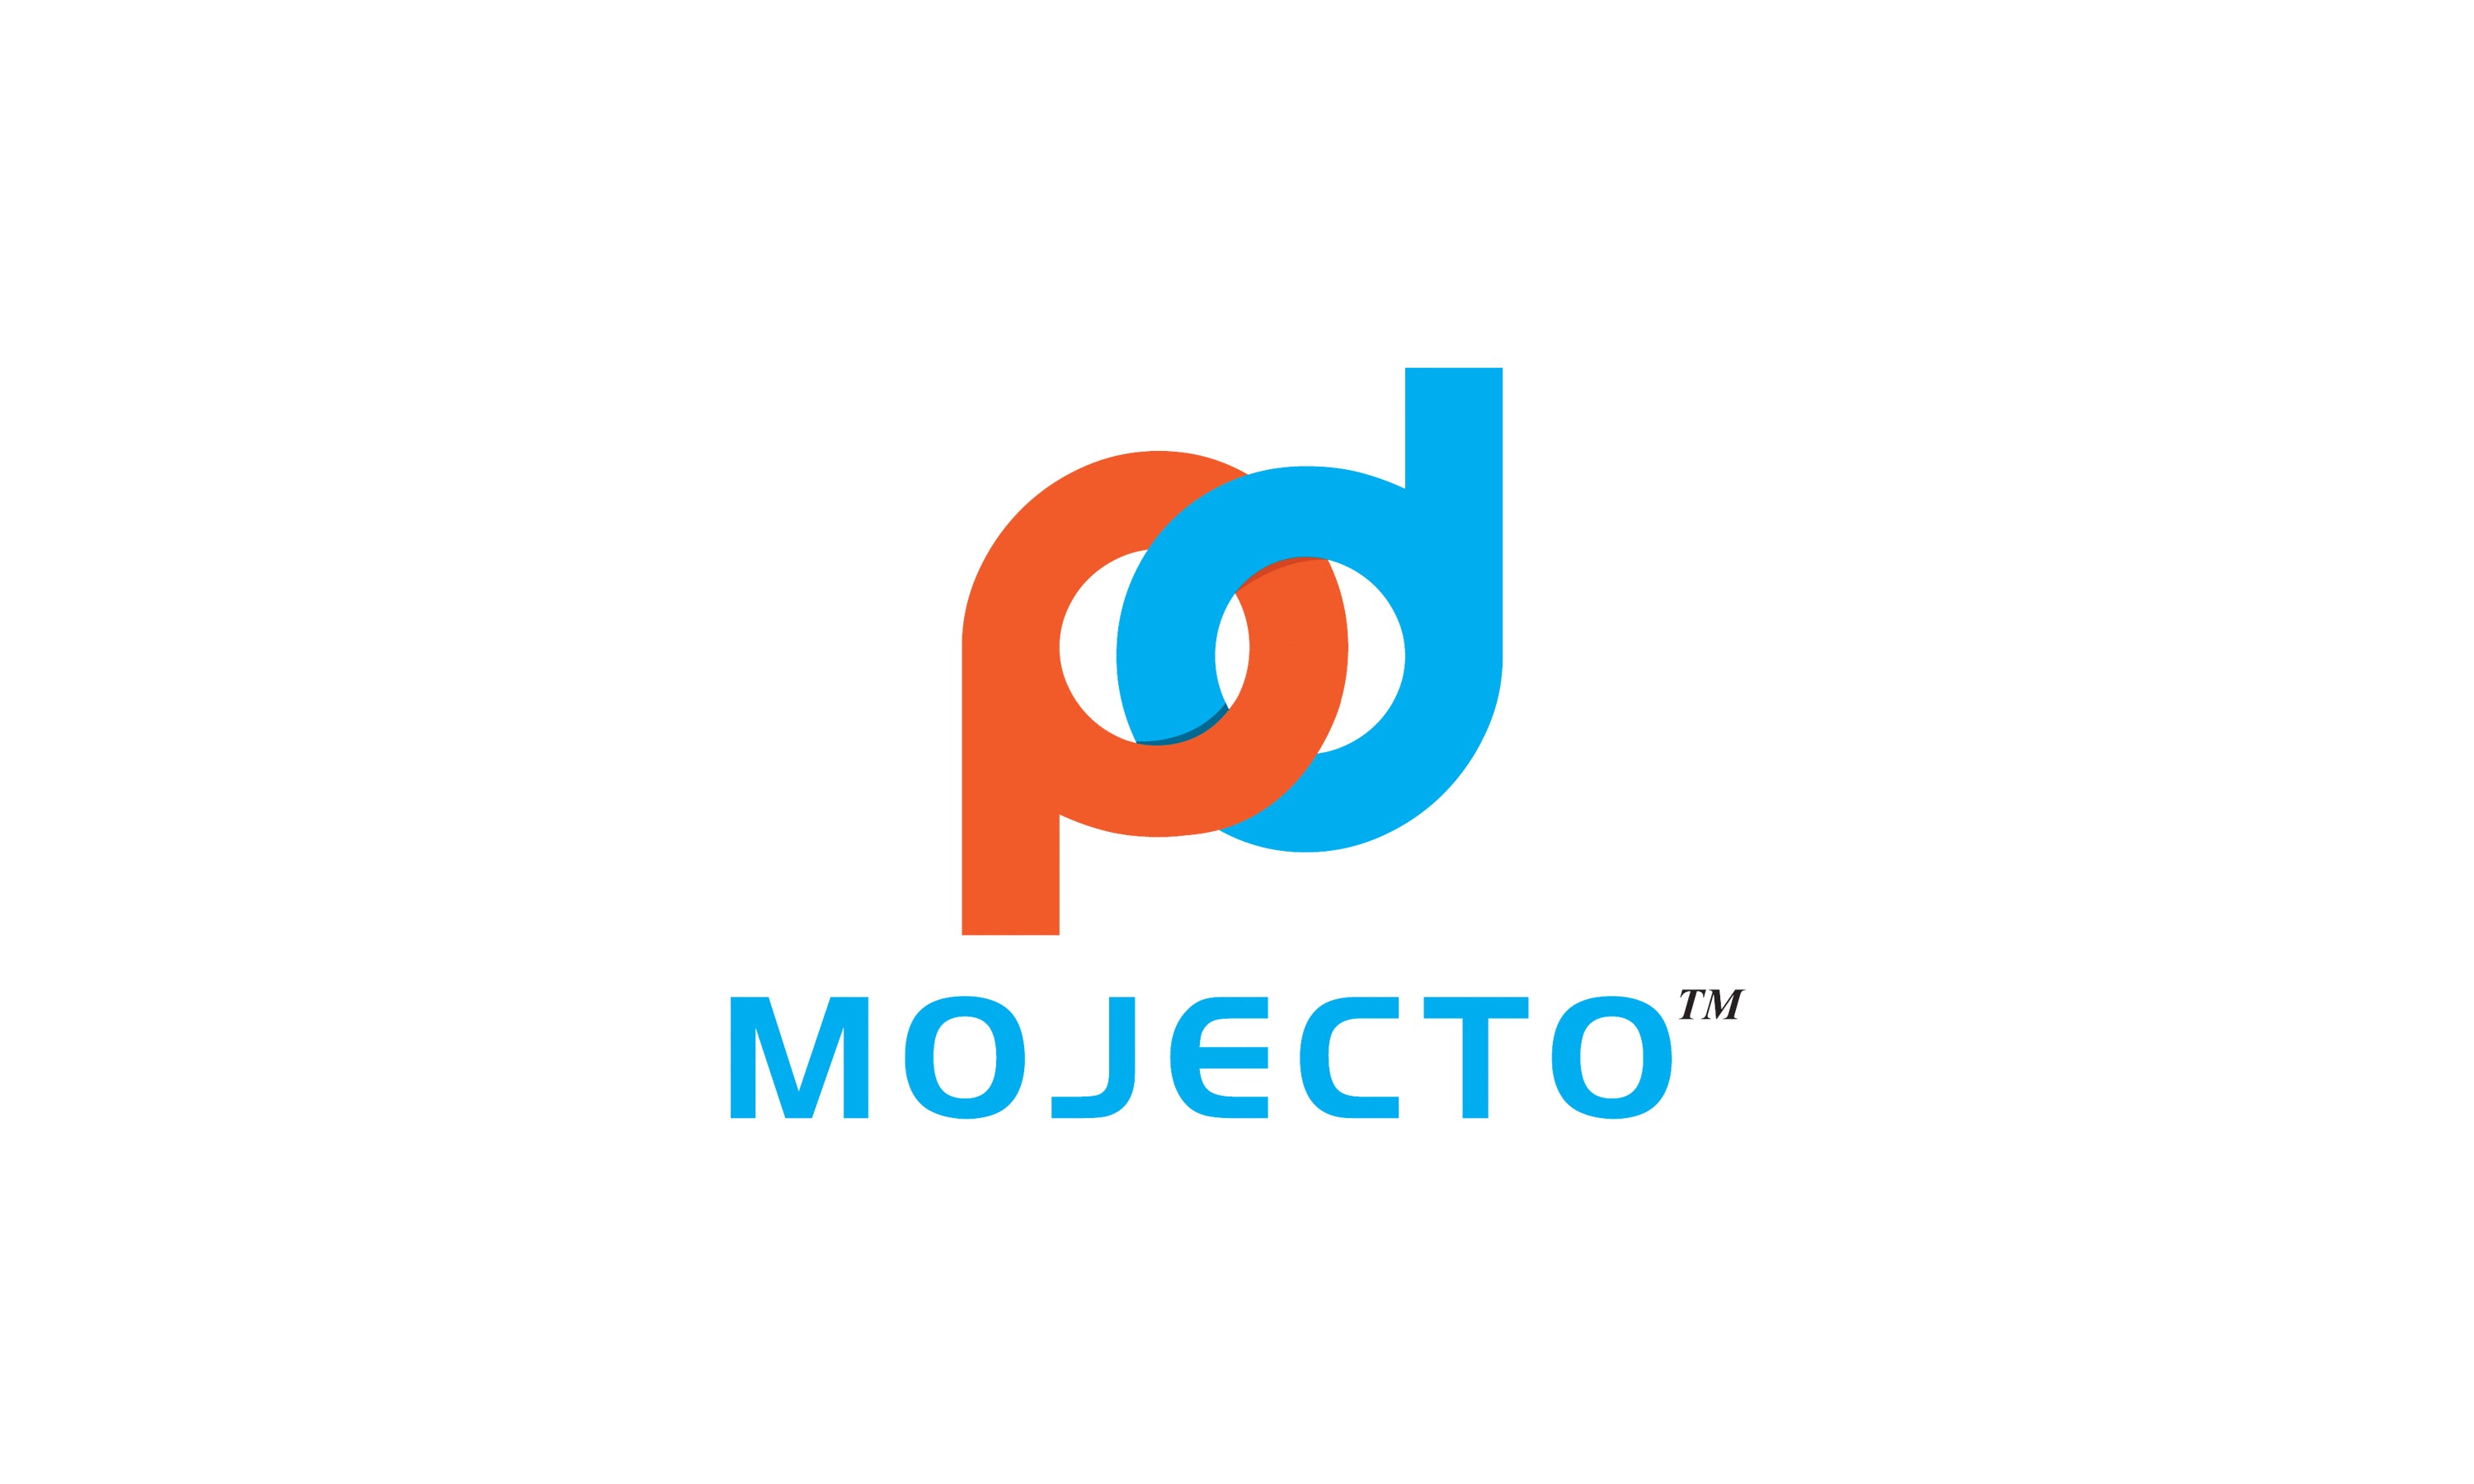 Home page – Mojecto